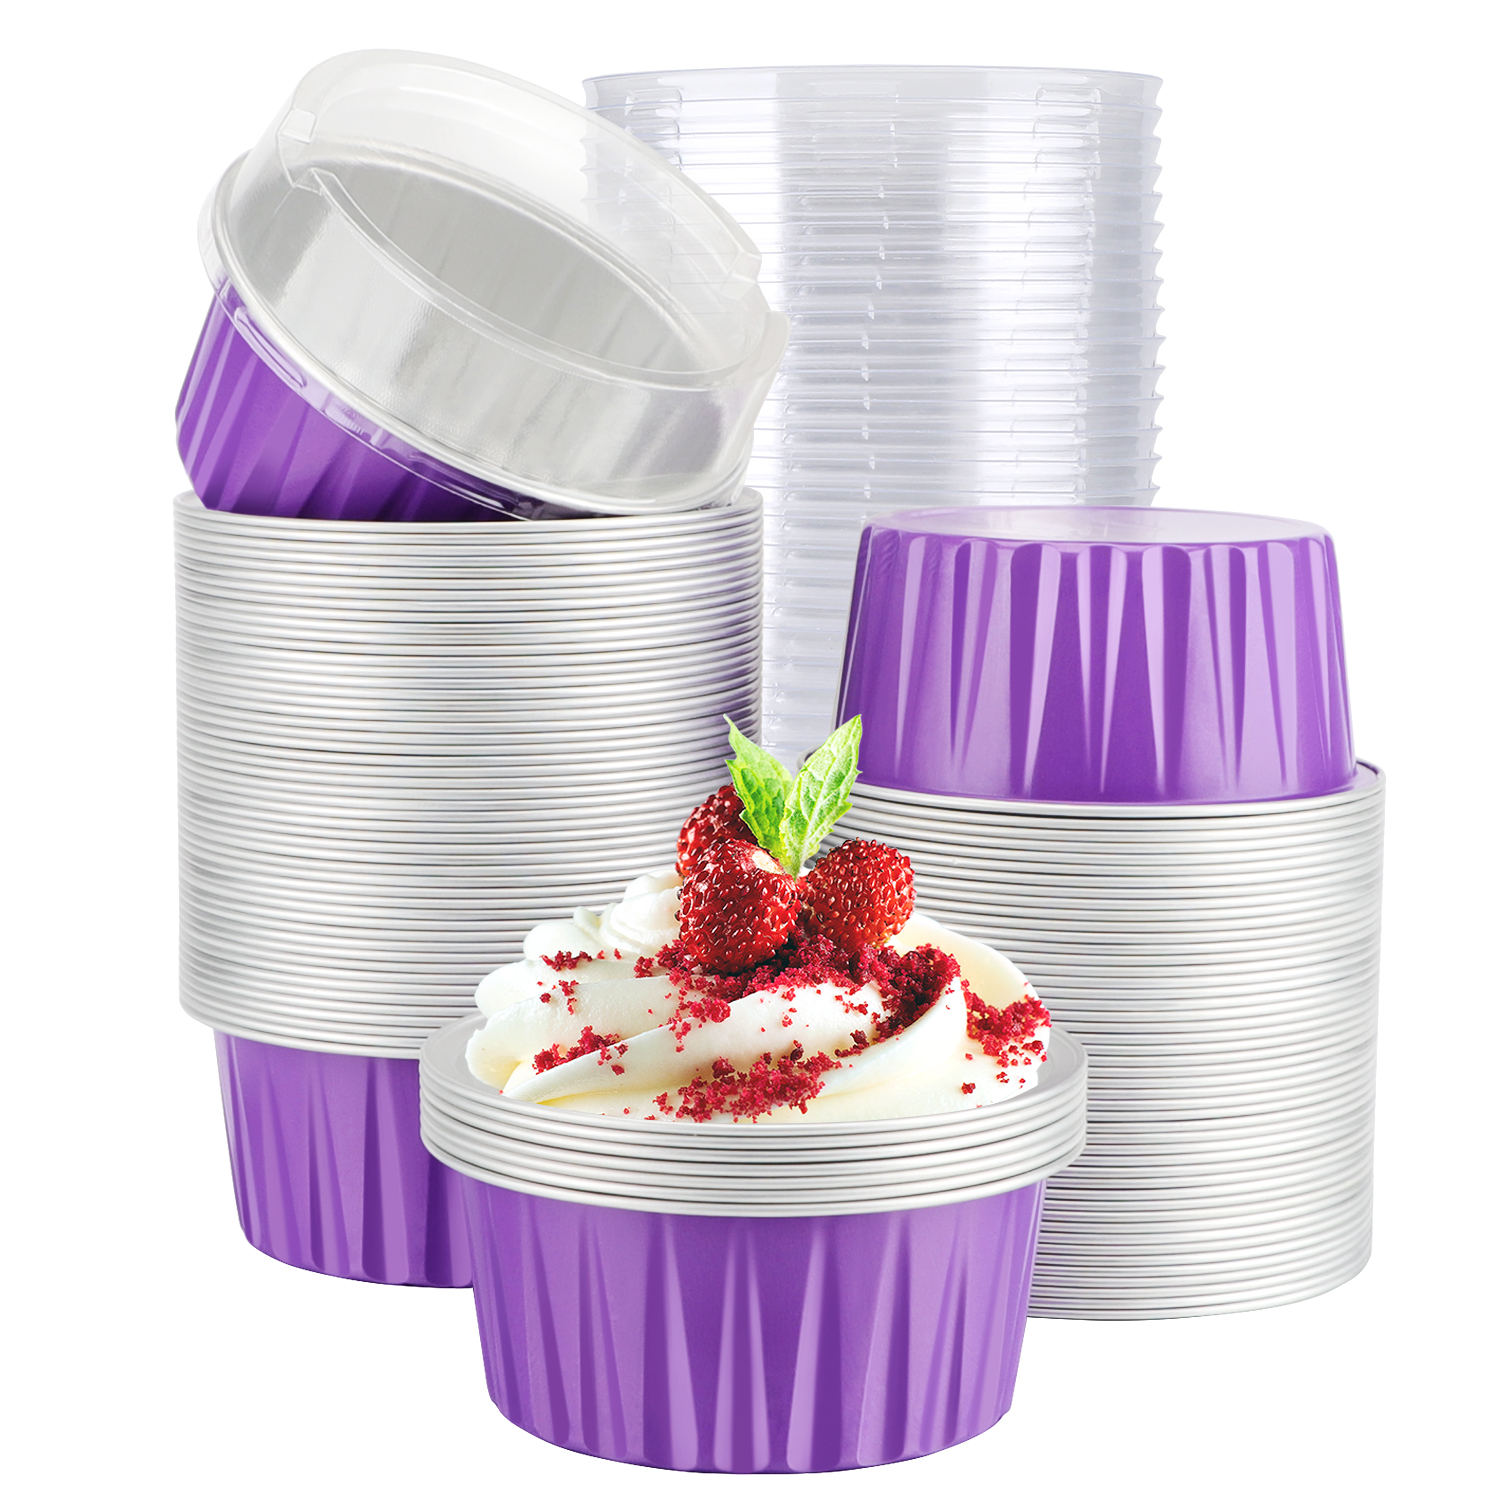 Lyellfe 60 Pack Aluminum Foil Baking Cups, 5 Oz Disposable Ramekins with  Lids, Aluminum Foil Muffin Cups, Perfect for Cupcake, Souffle, Individual  Cheesecake